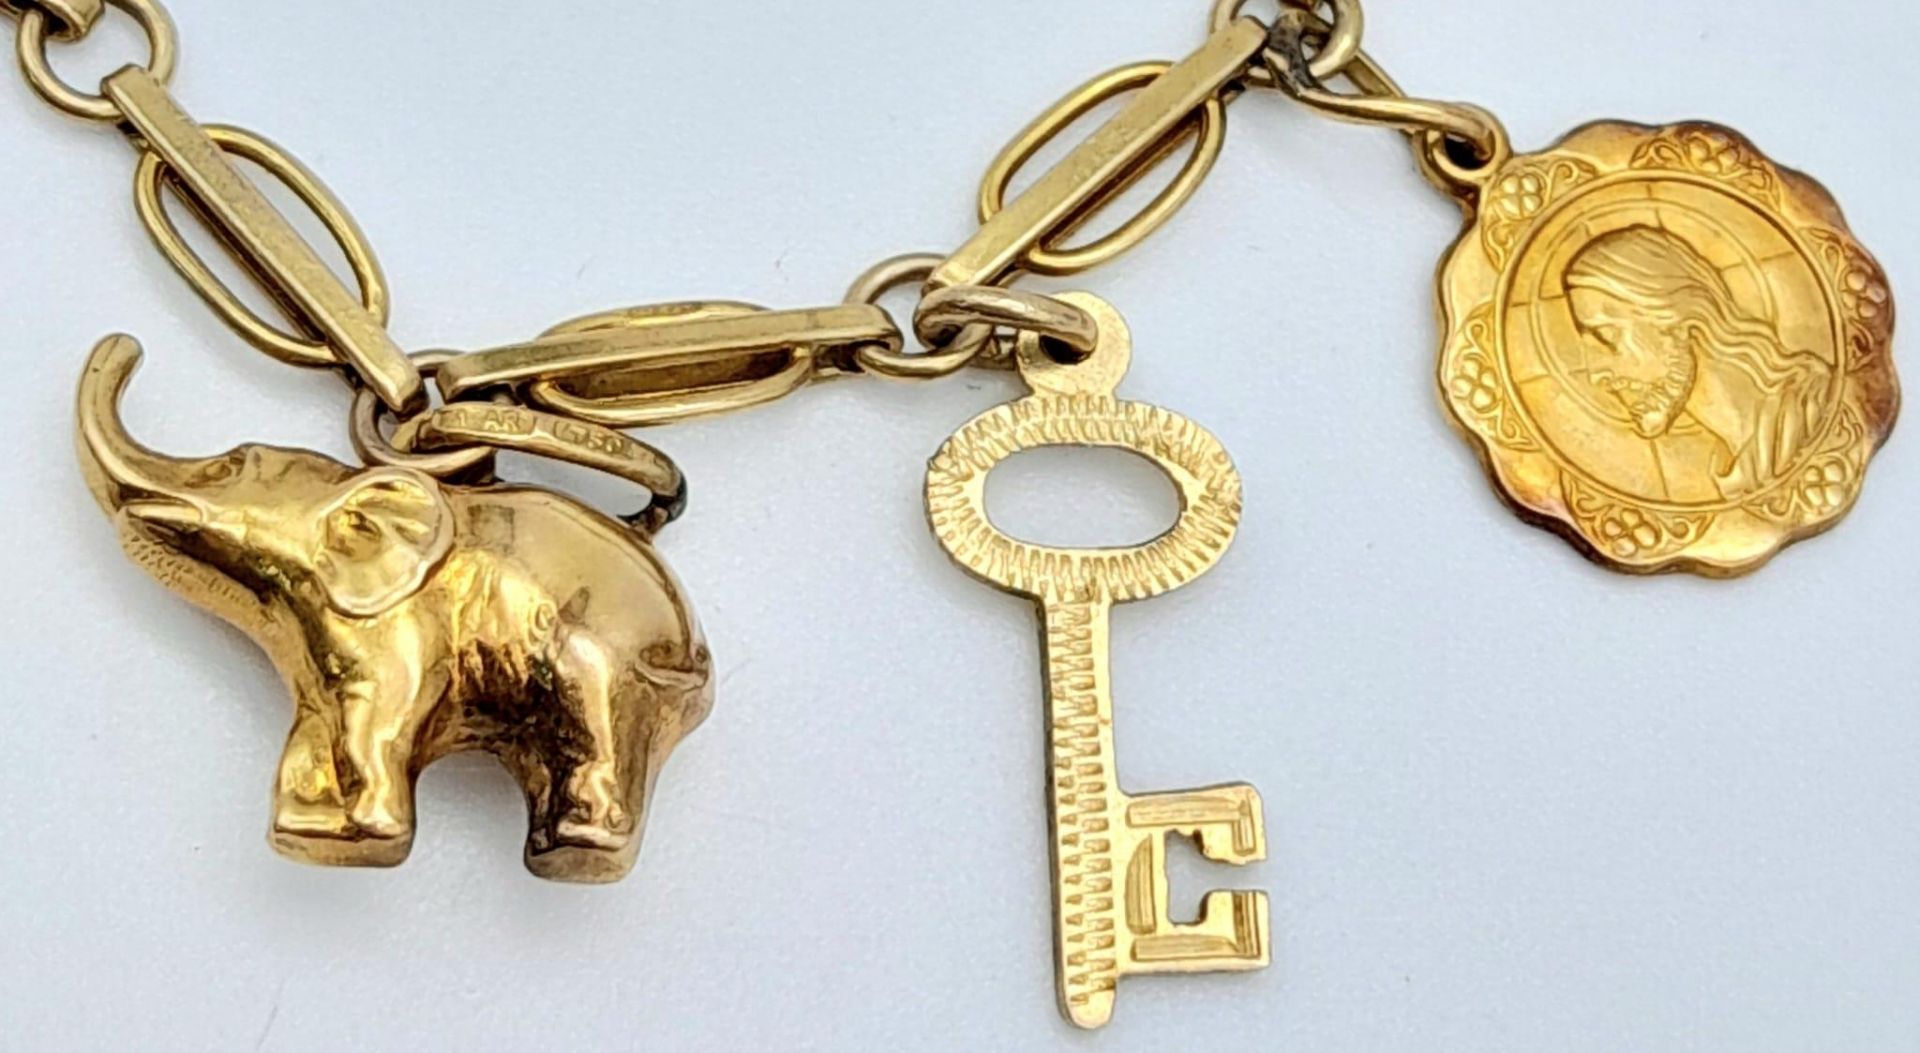 A 9K Yellow Gold Charm Bracelet. Eight charms including Elephant! 10.65g weight. - Image 3 of 6